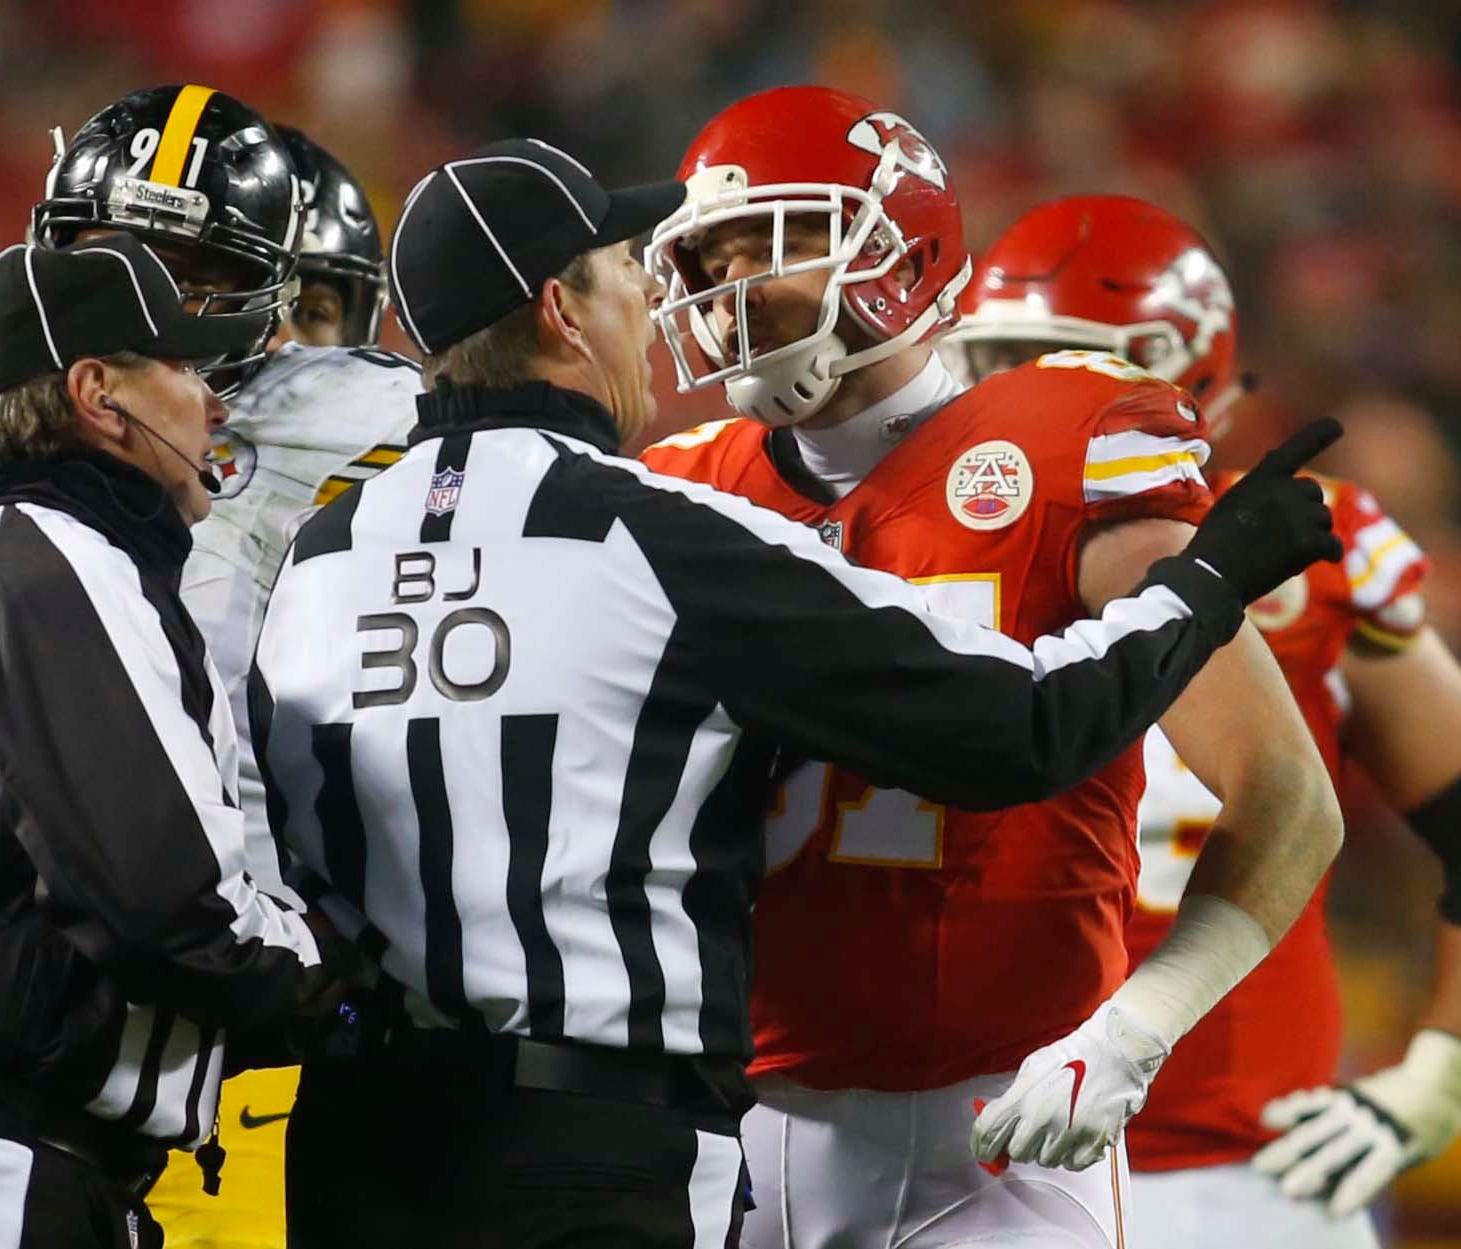 Kansas City Chiefs tight end Travis Kelce (87) is held back by back judge Todd Prukop (30) as he speaks to field judge Doug Rosenbaum (67) during the third quarter against the Pittsburgh Steelers in the AFC Divisional playoff game at Arrowhead Stadiu